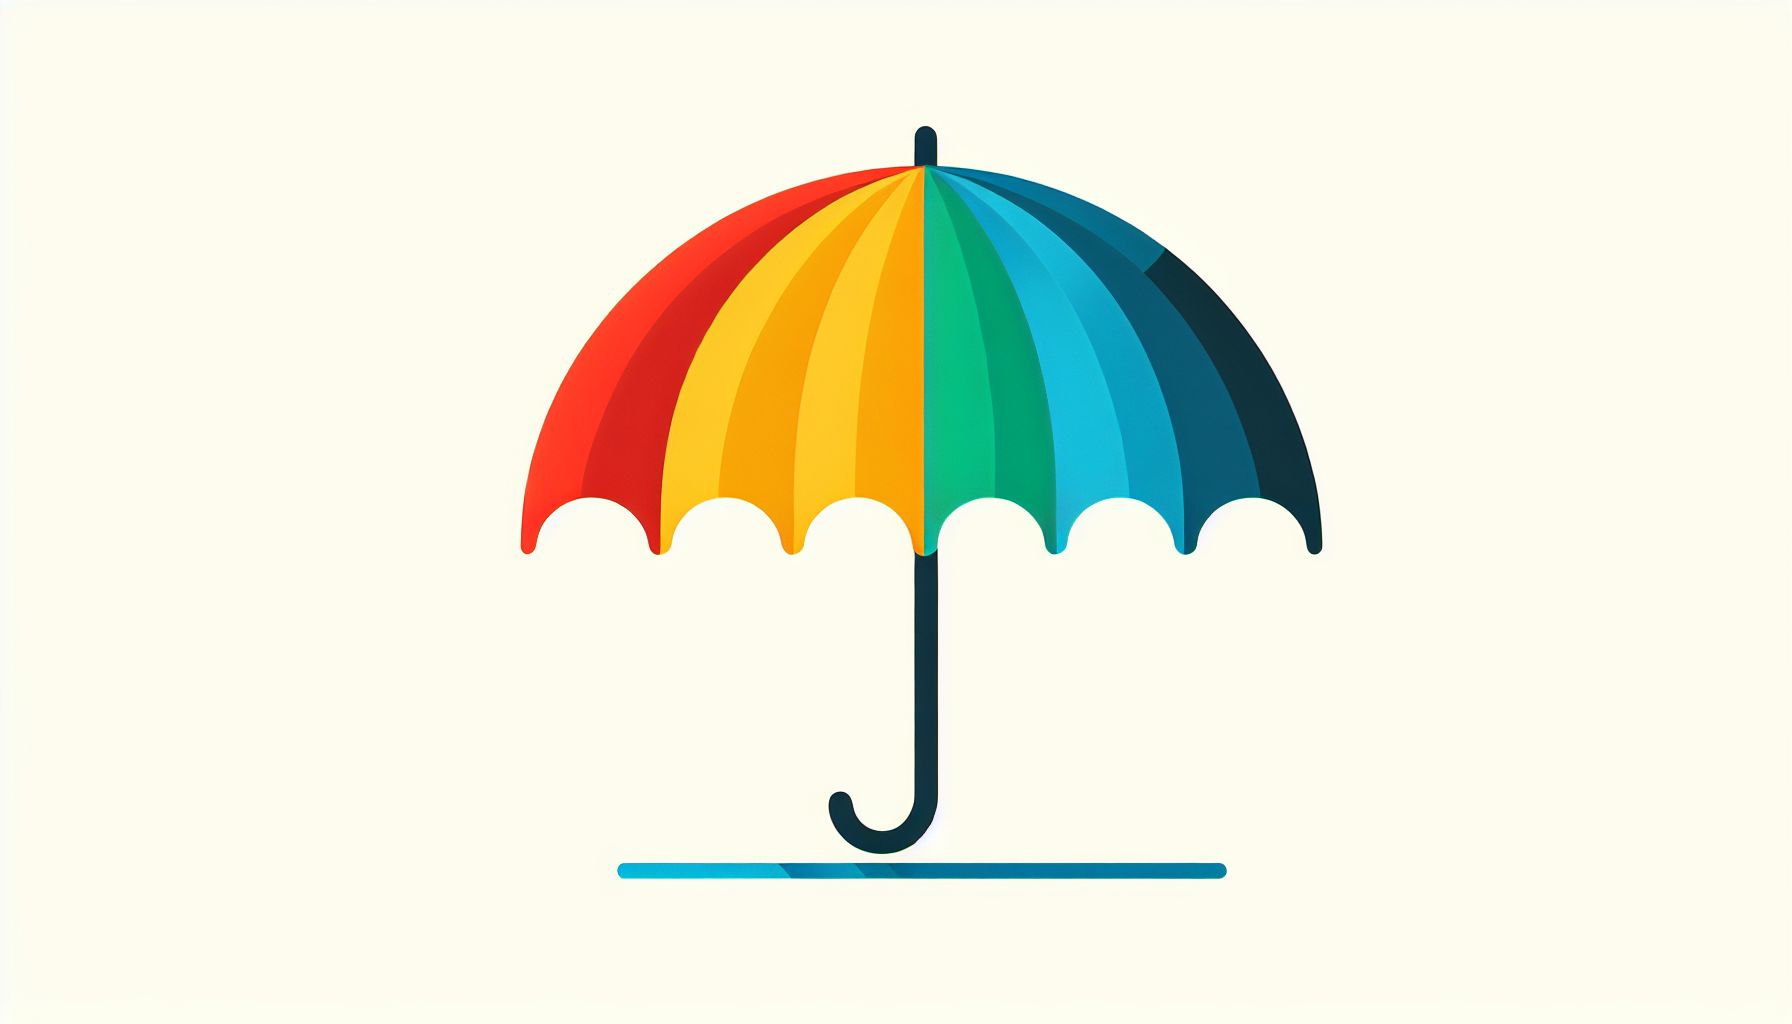 Umbrella in flat illustration style and white background, red #f47574, green #88c7a8, yellow #fcc44b, and blue #645bc8 colors.